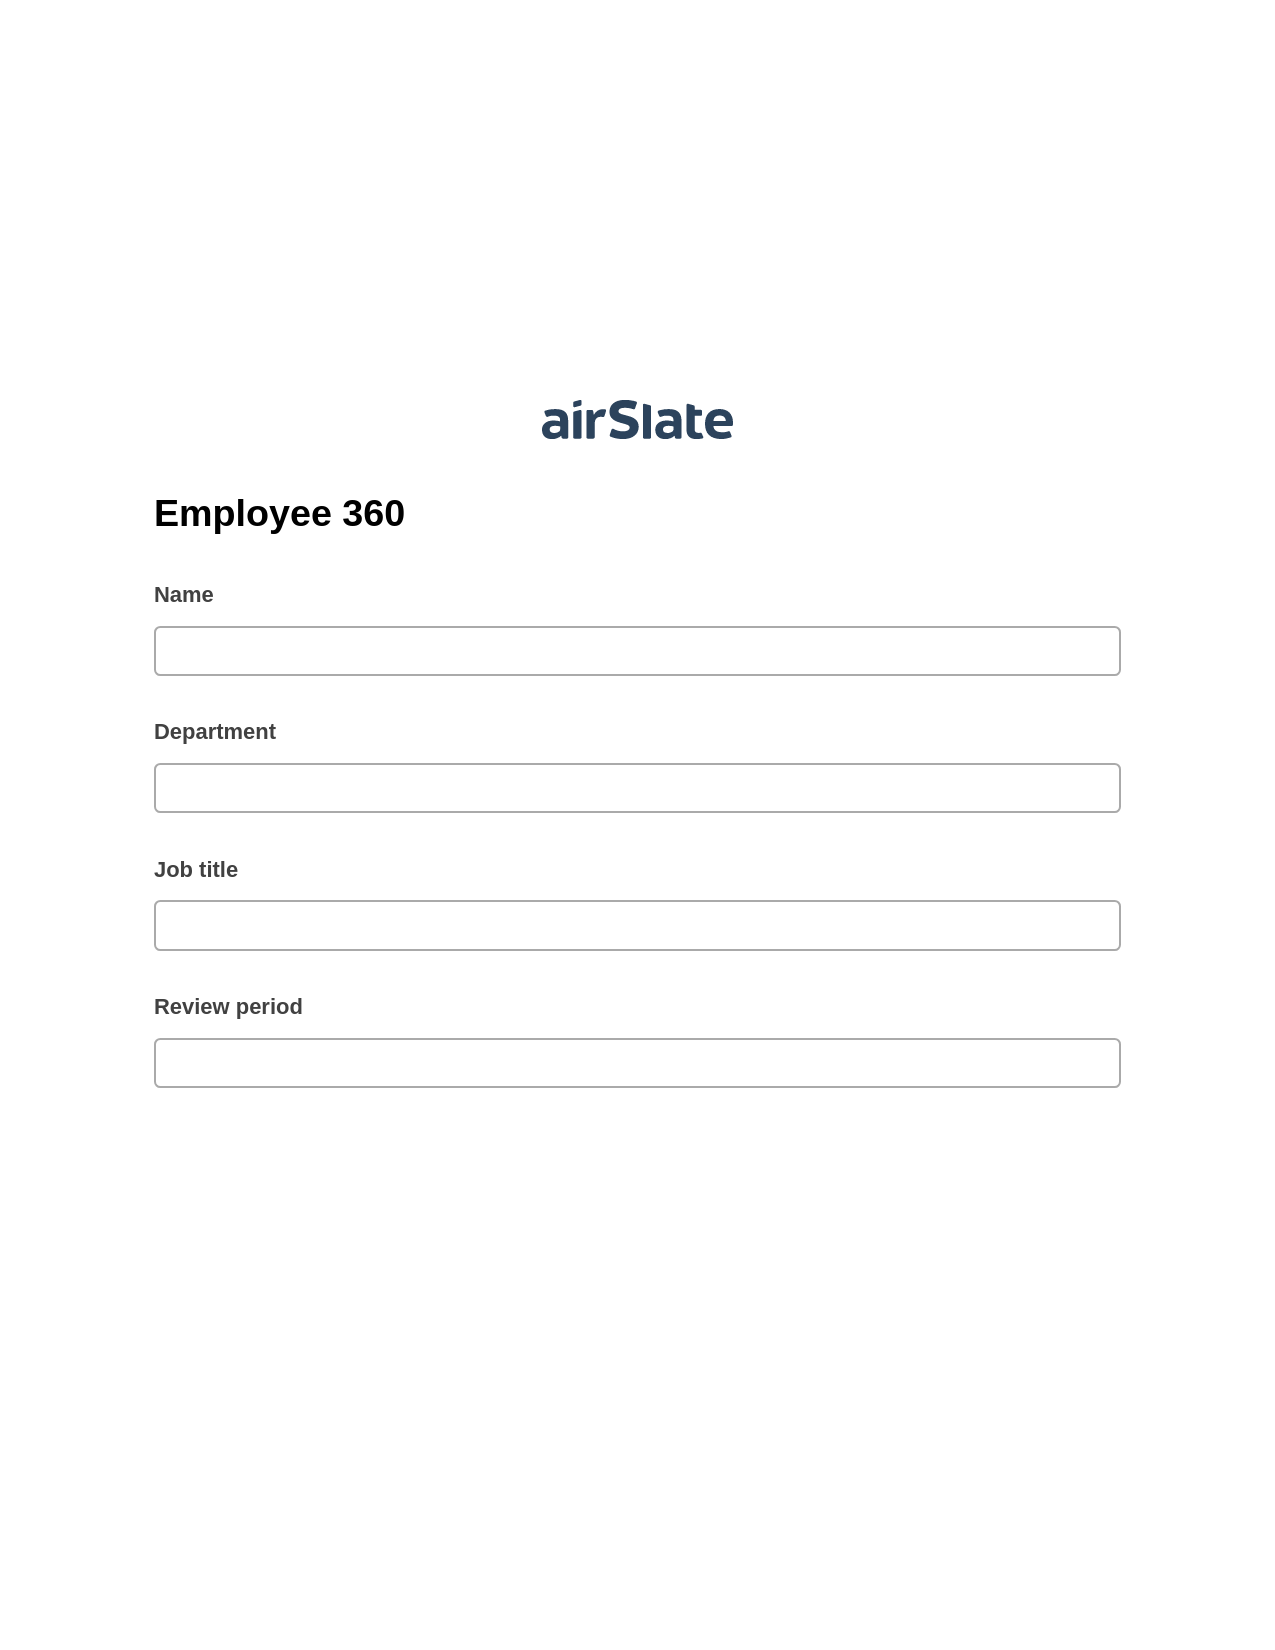 Multirole Employee 360 Pre-fill from MySQL Bot, Export to MS Dynamics 365 Bot, Export to Smartsheet